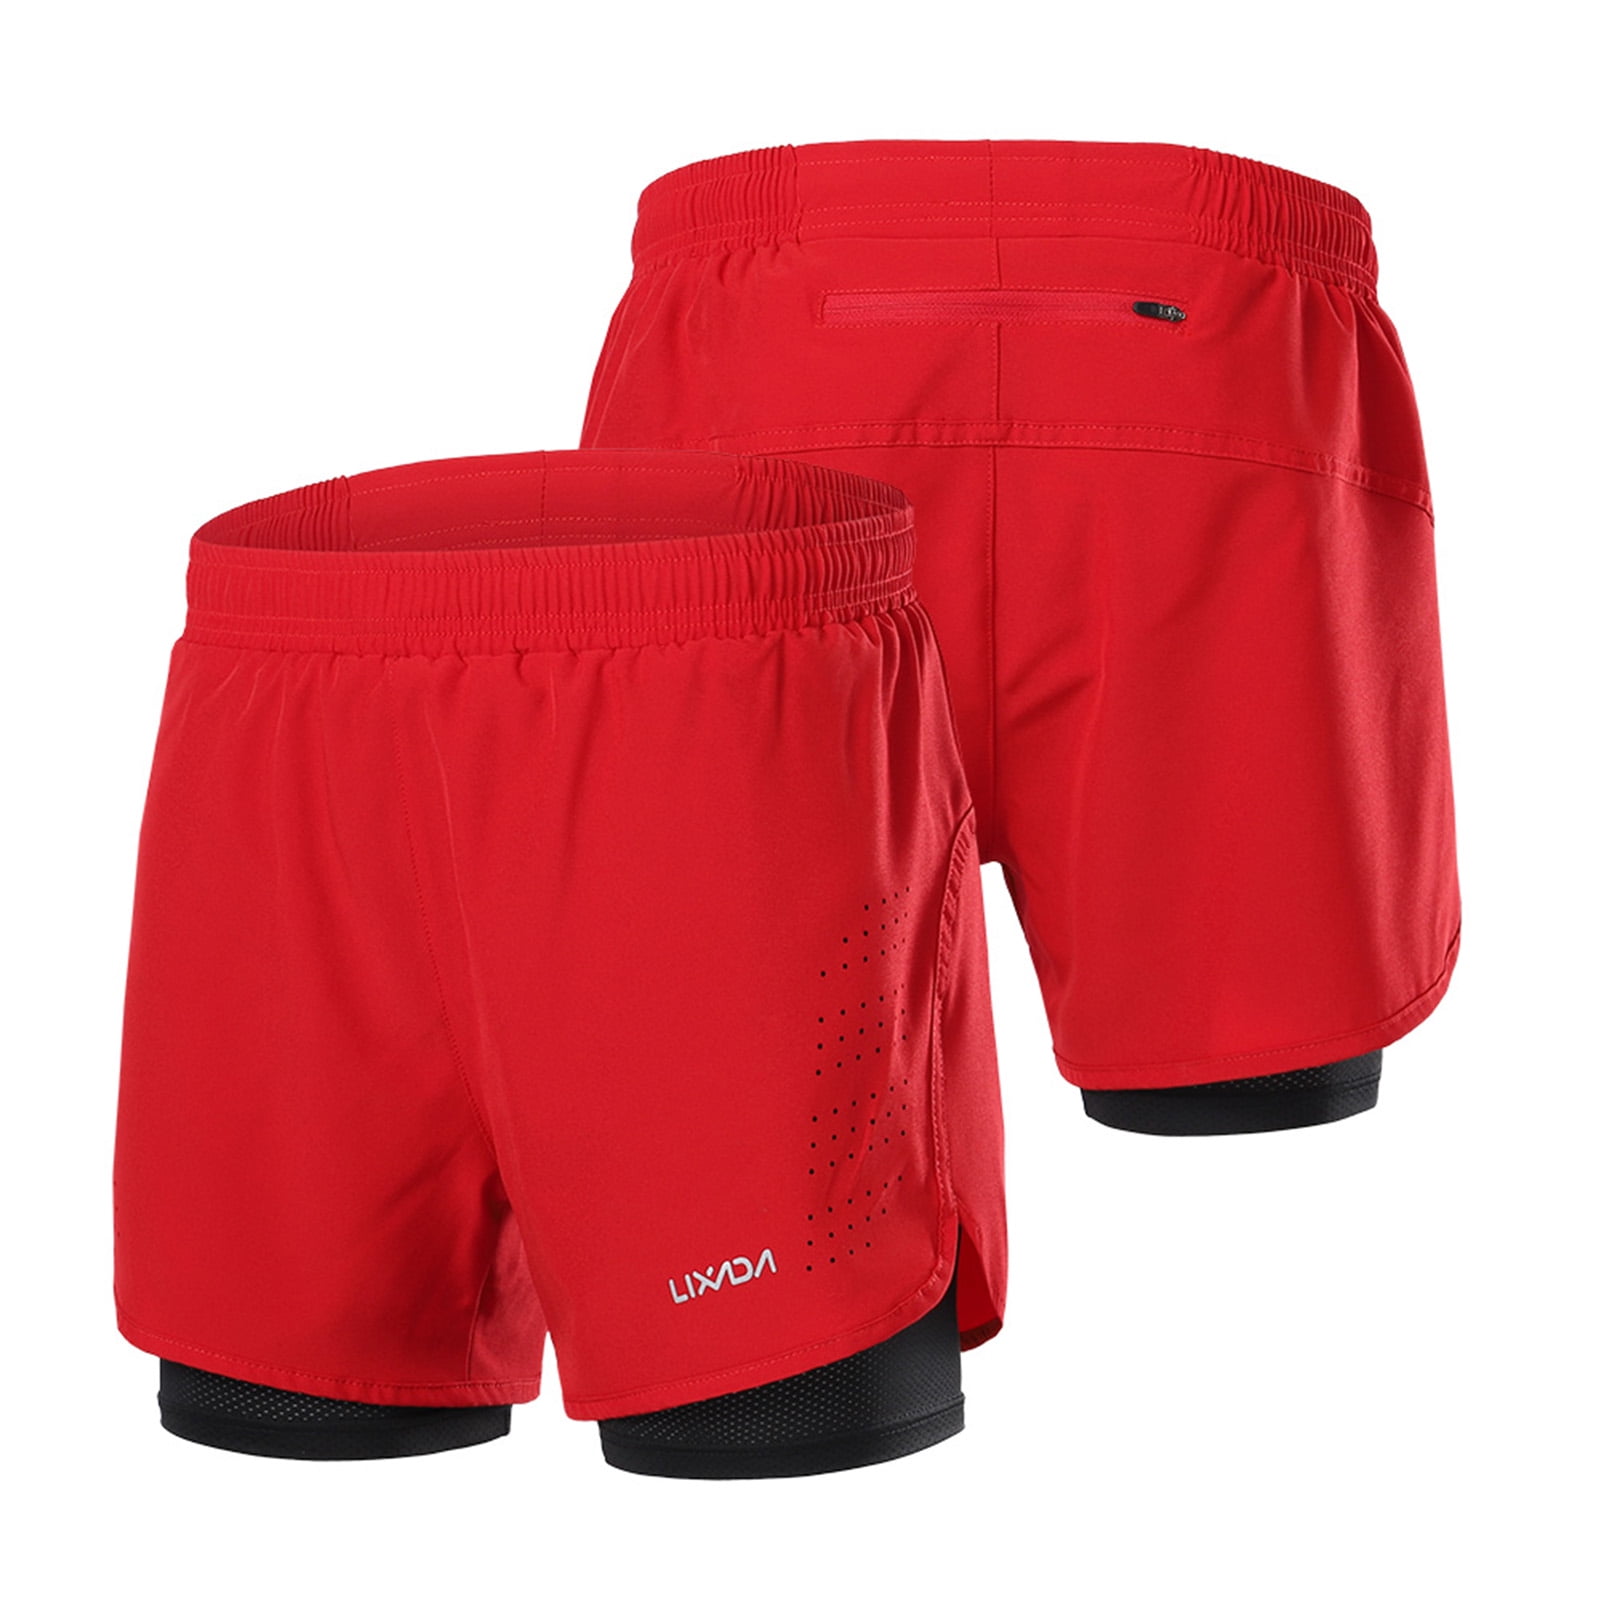 Mens Sports Running Shorts Active Training Exercise Jogging 2 in 1 Shorts 